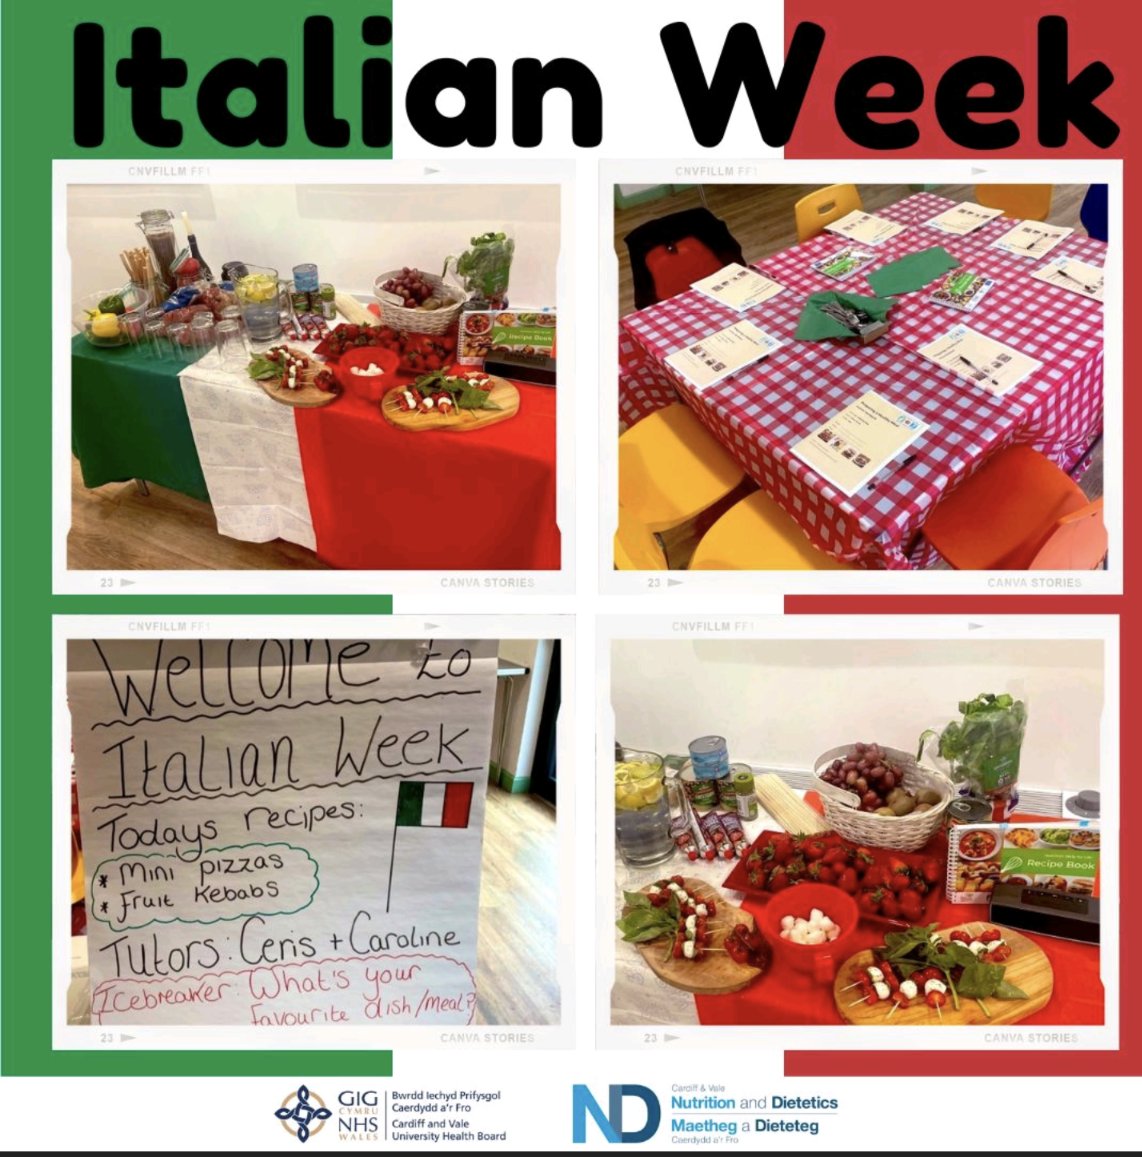 Bringing a taste of Italy to Cardiff this week at Preparing a Healthy Meal course @CAERHeritage 📃Mini pizzas Caprese skewers Fruit kebabs Healthy, low cost alternatives to a take away 😊🍅🧅🧄